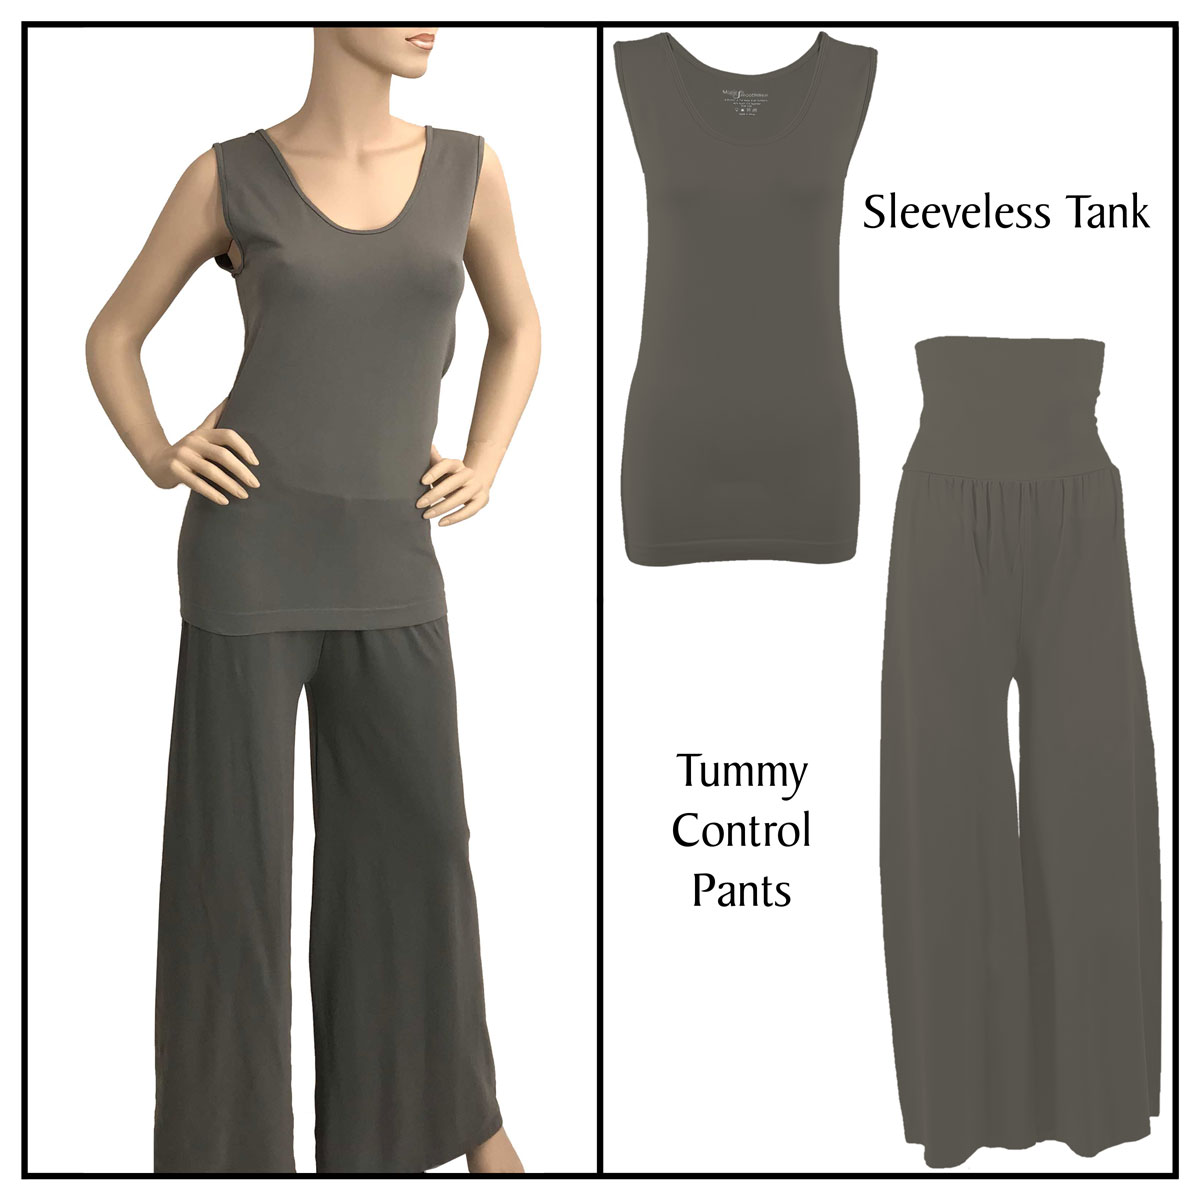 Grey/Charcoal Sleeveless Top (One Size) with Pants